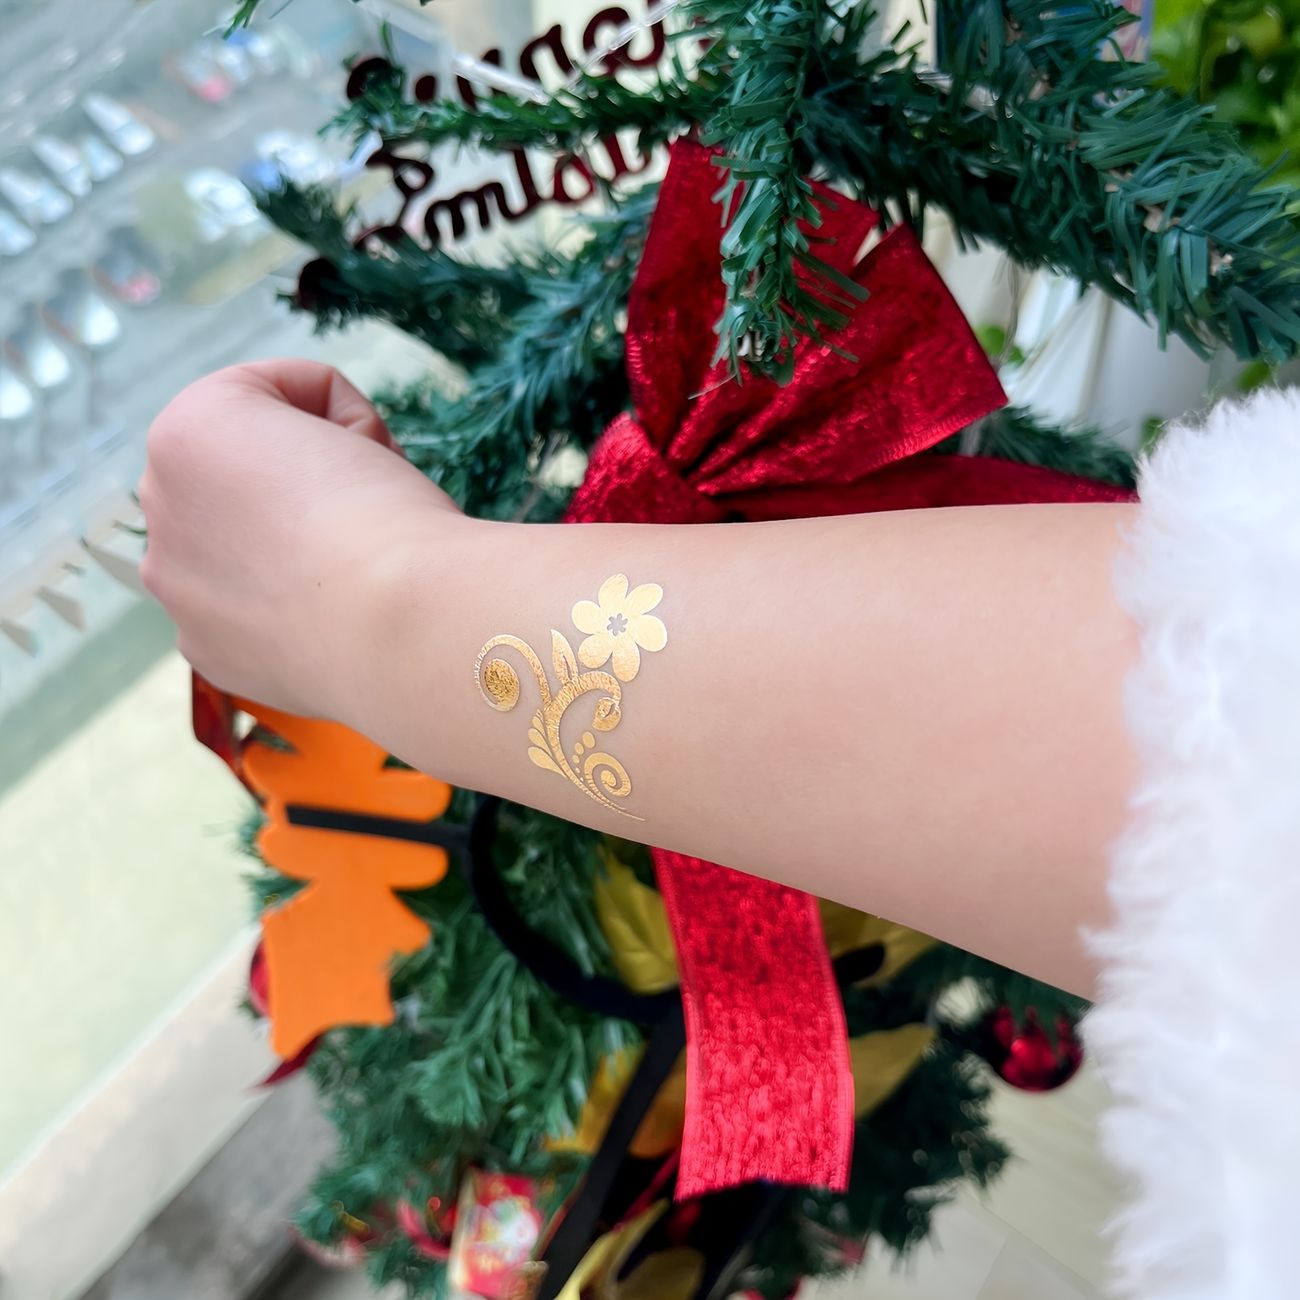 Metallic Temporary Tattoo Gold Silver Eye And Lips Floral Pattern Fake  Tattoos Flash Jewelry Tattoos Waterproof And Long Lasting Boho Style Tattoos  For Women And Girls | Free Shipping For New Users |